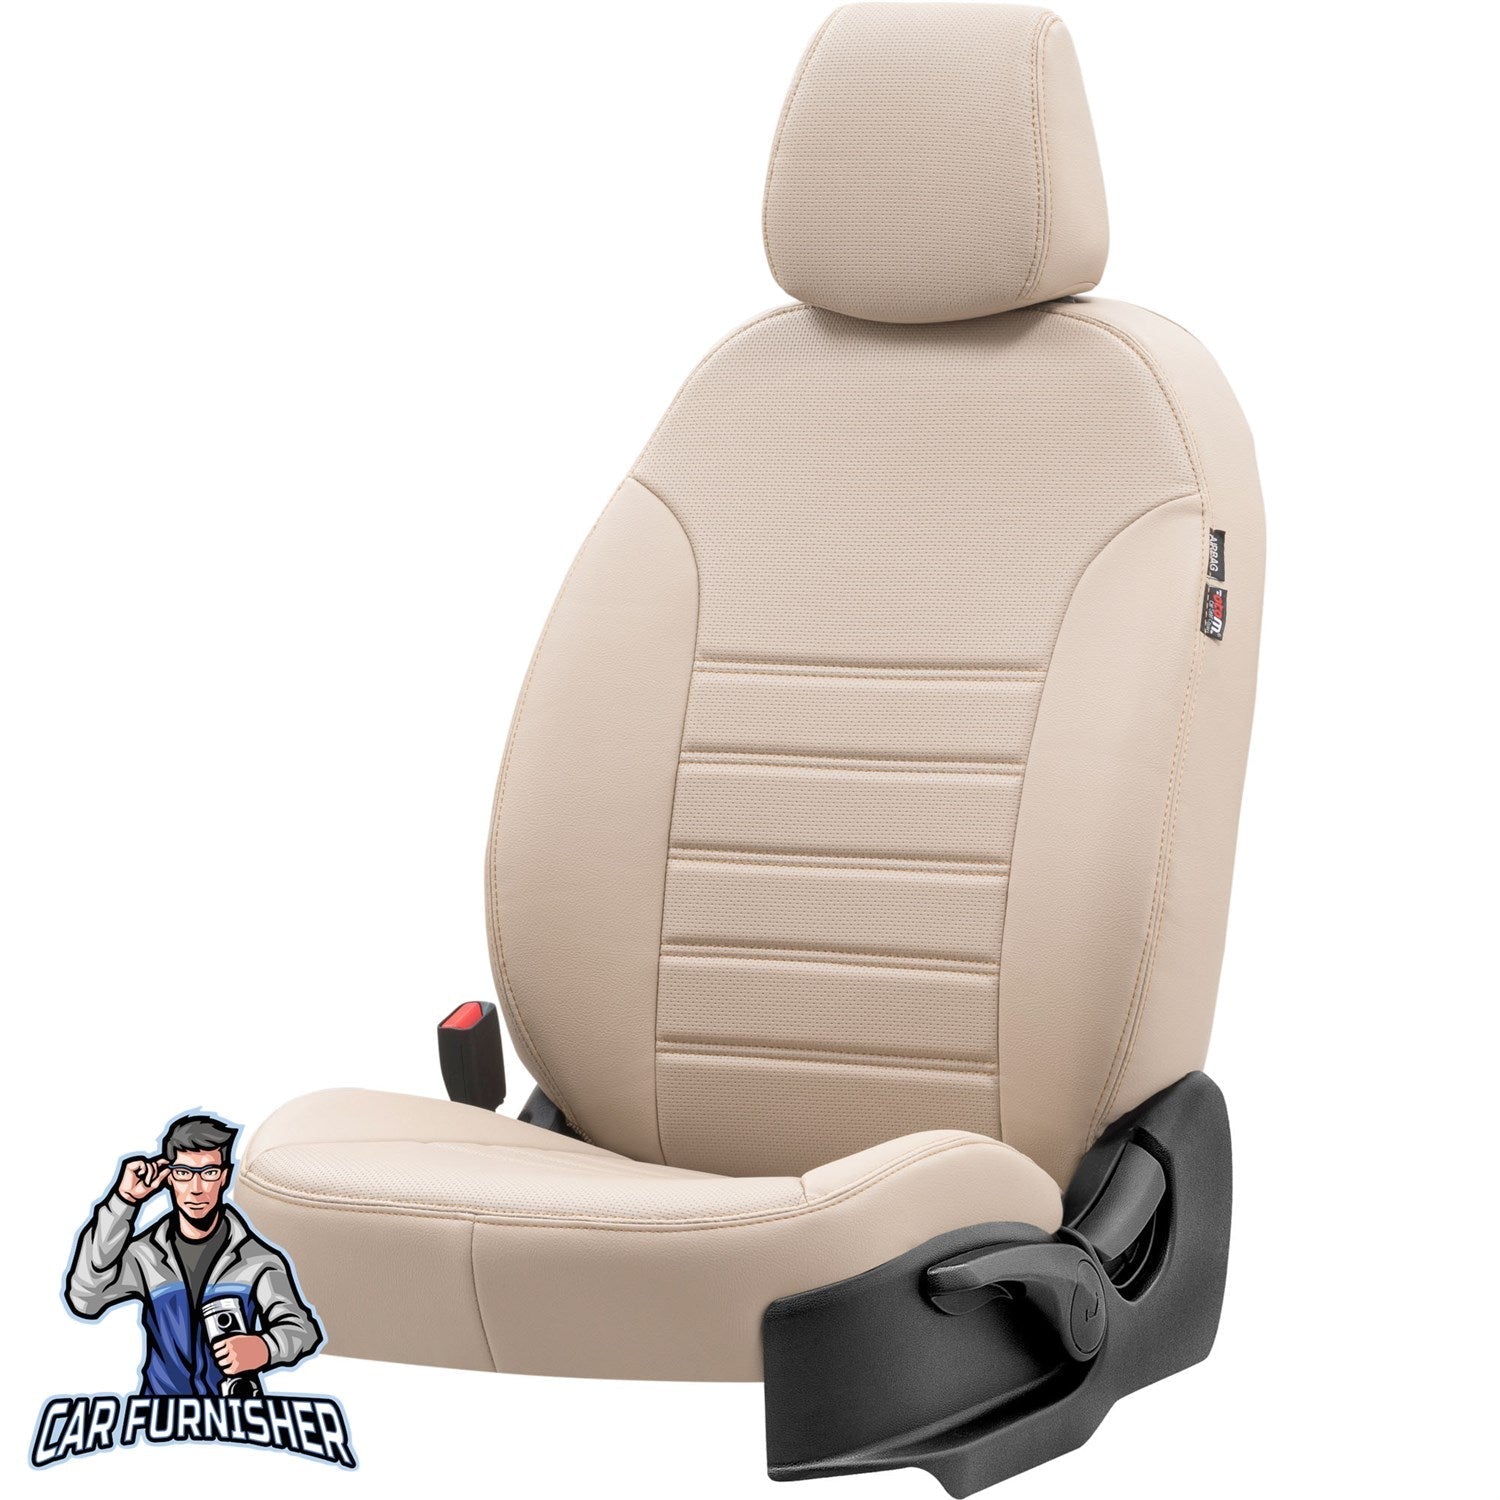 Volkswagen Caravelle Seat Cover New York Leather Design Beige Leather